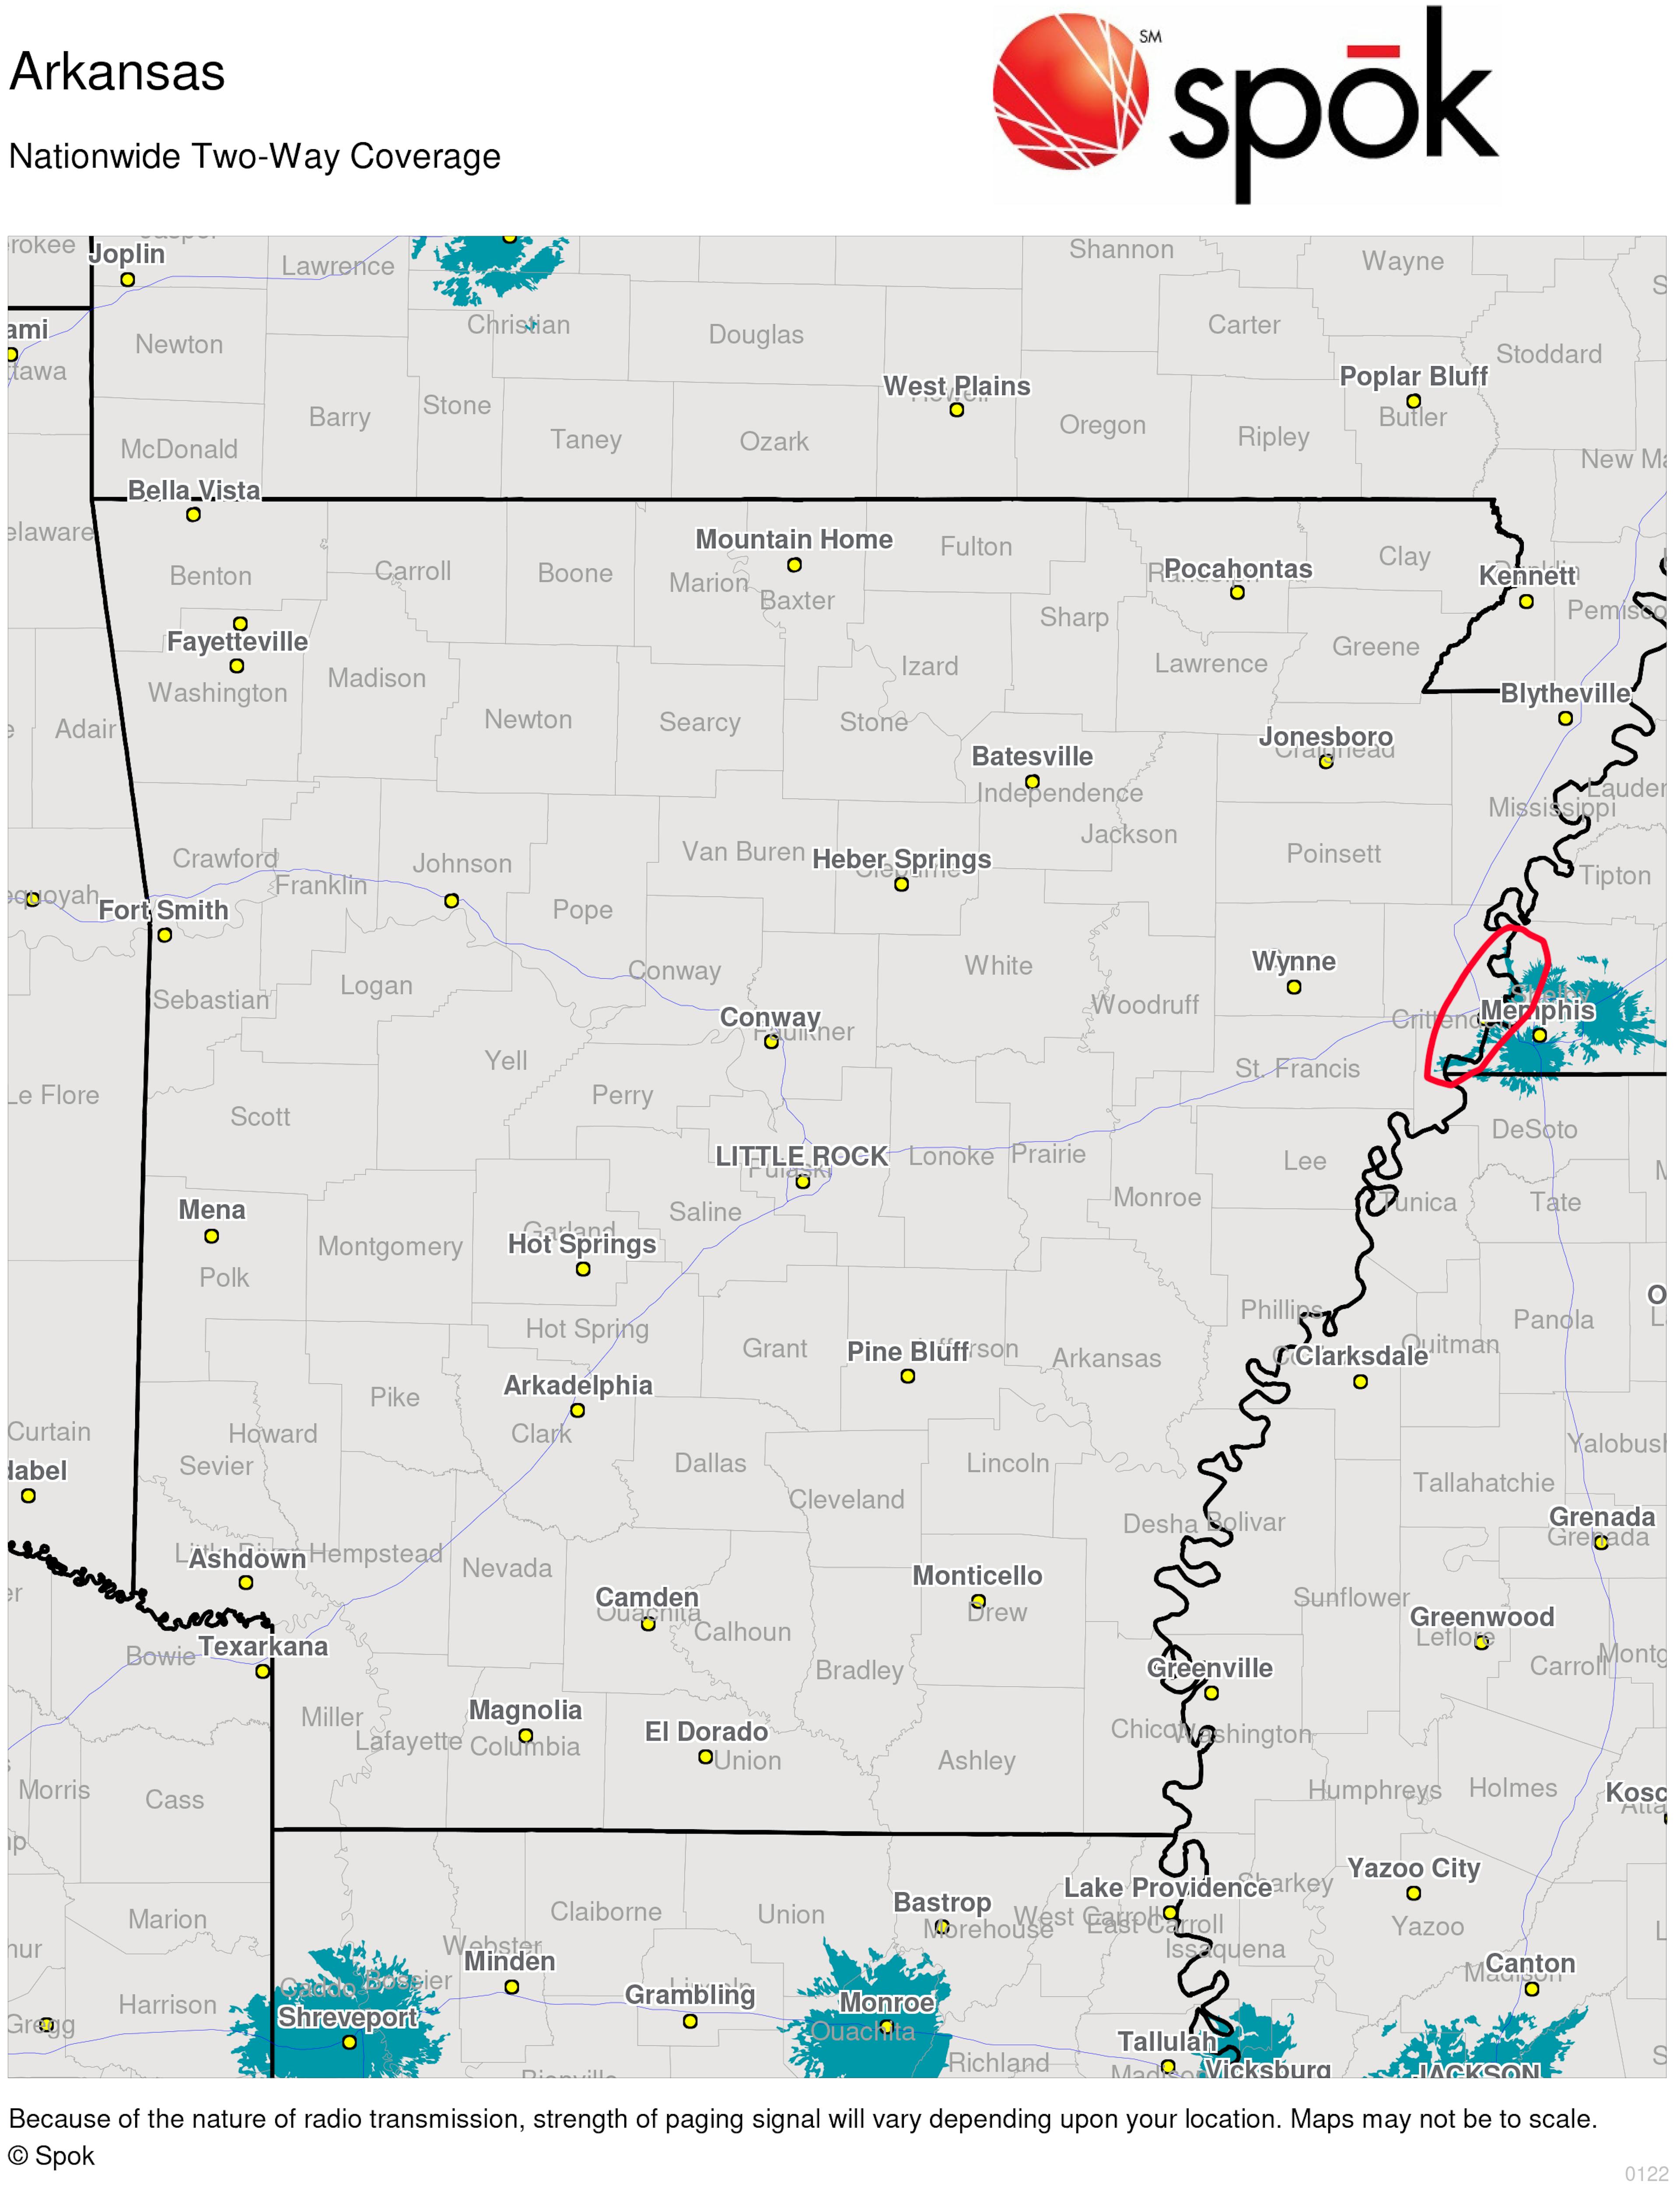 Arkansas Two-Way Pager Coverage Map. Copyright Spok, Inc.